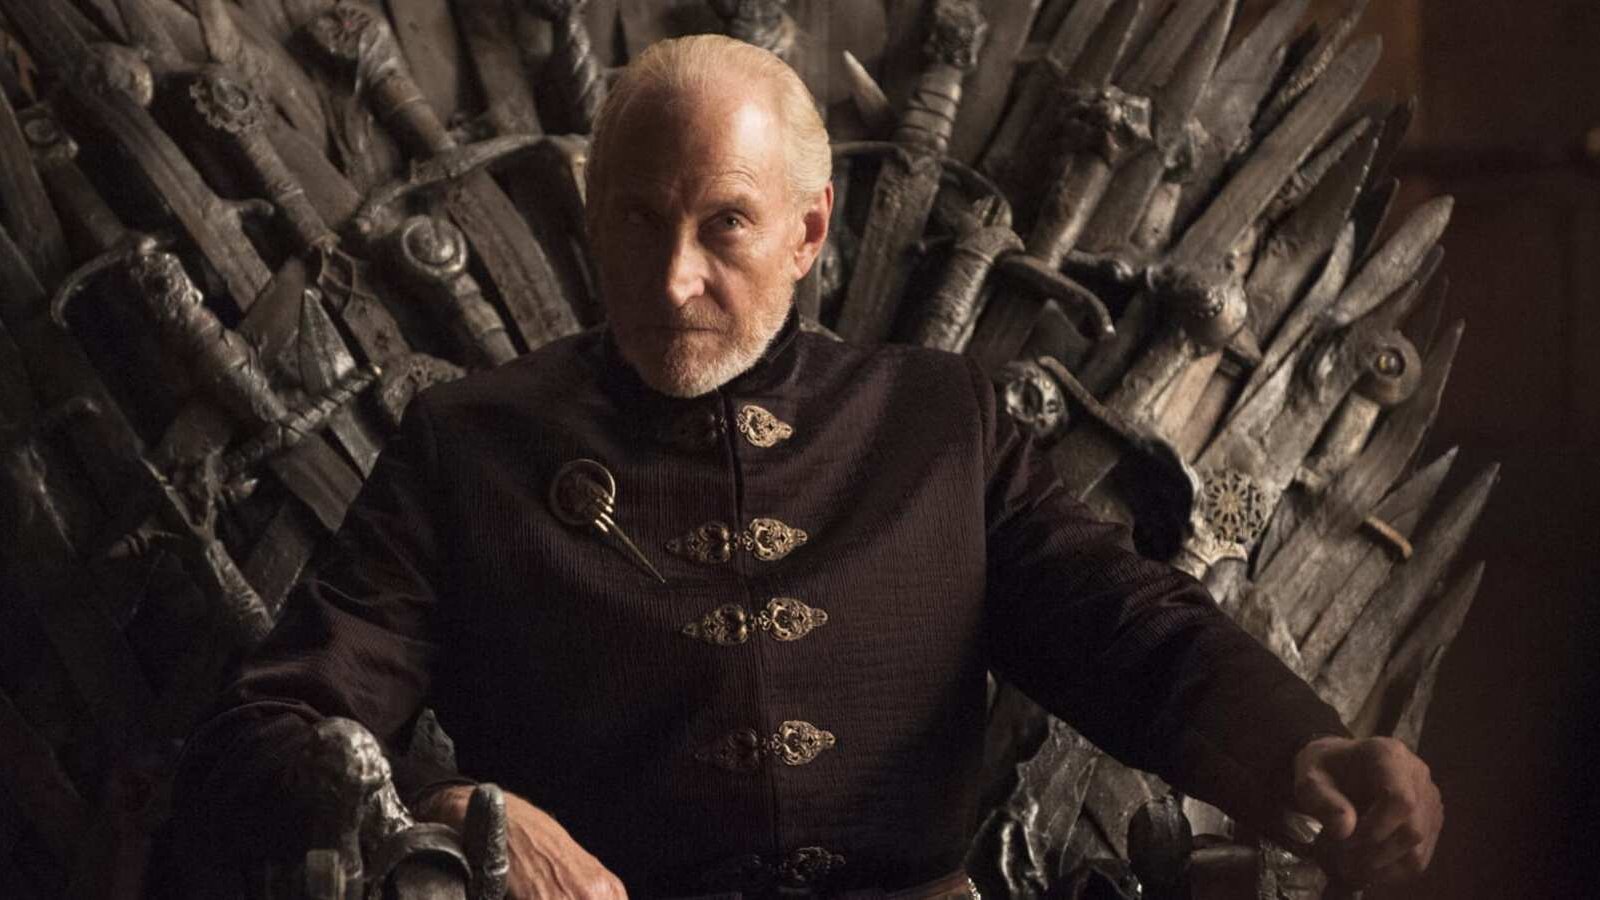 Game of Thrones, Charles Dance: "With a network other than HBO and Sky the show would have been cancelled"